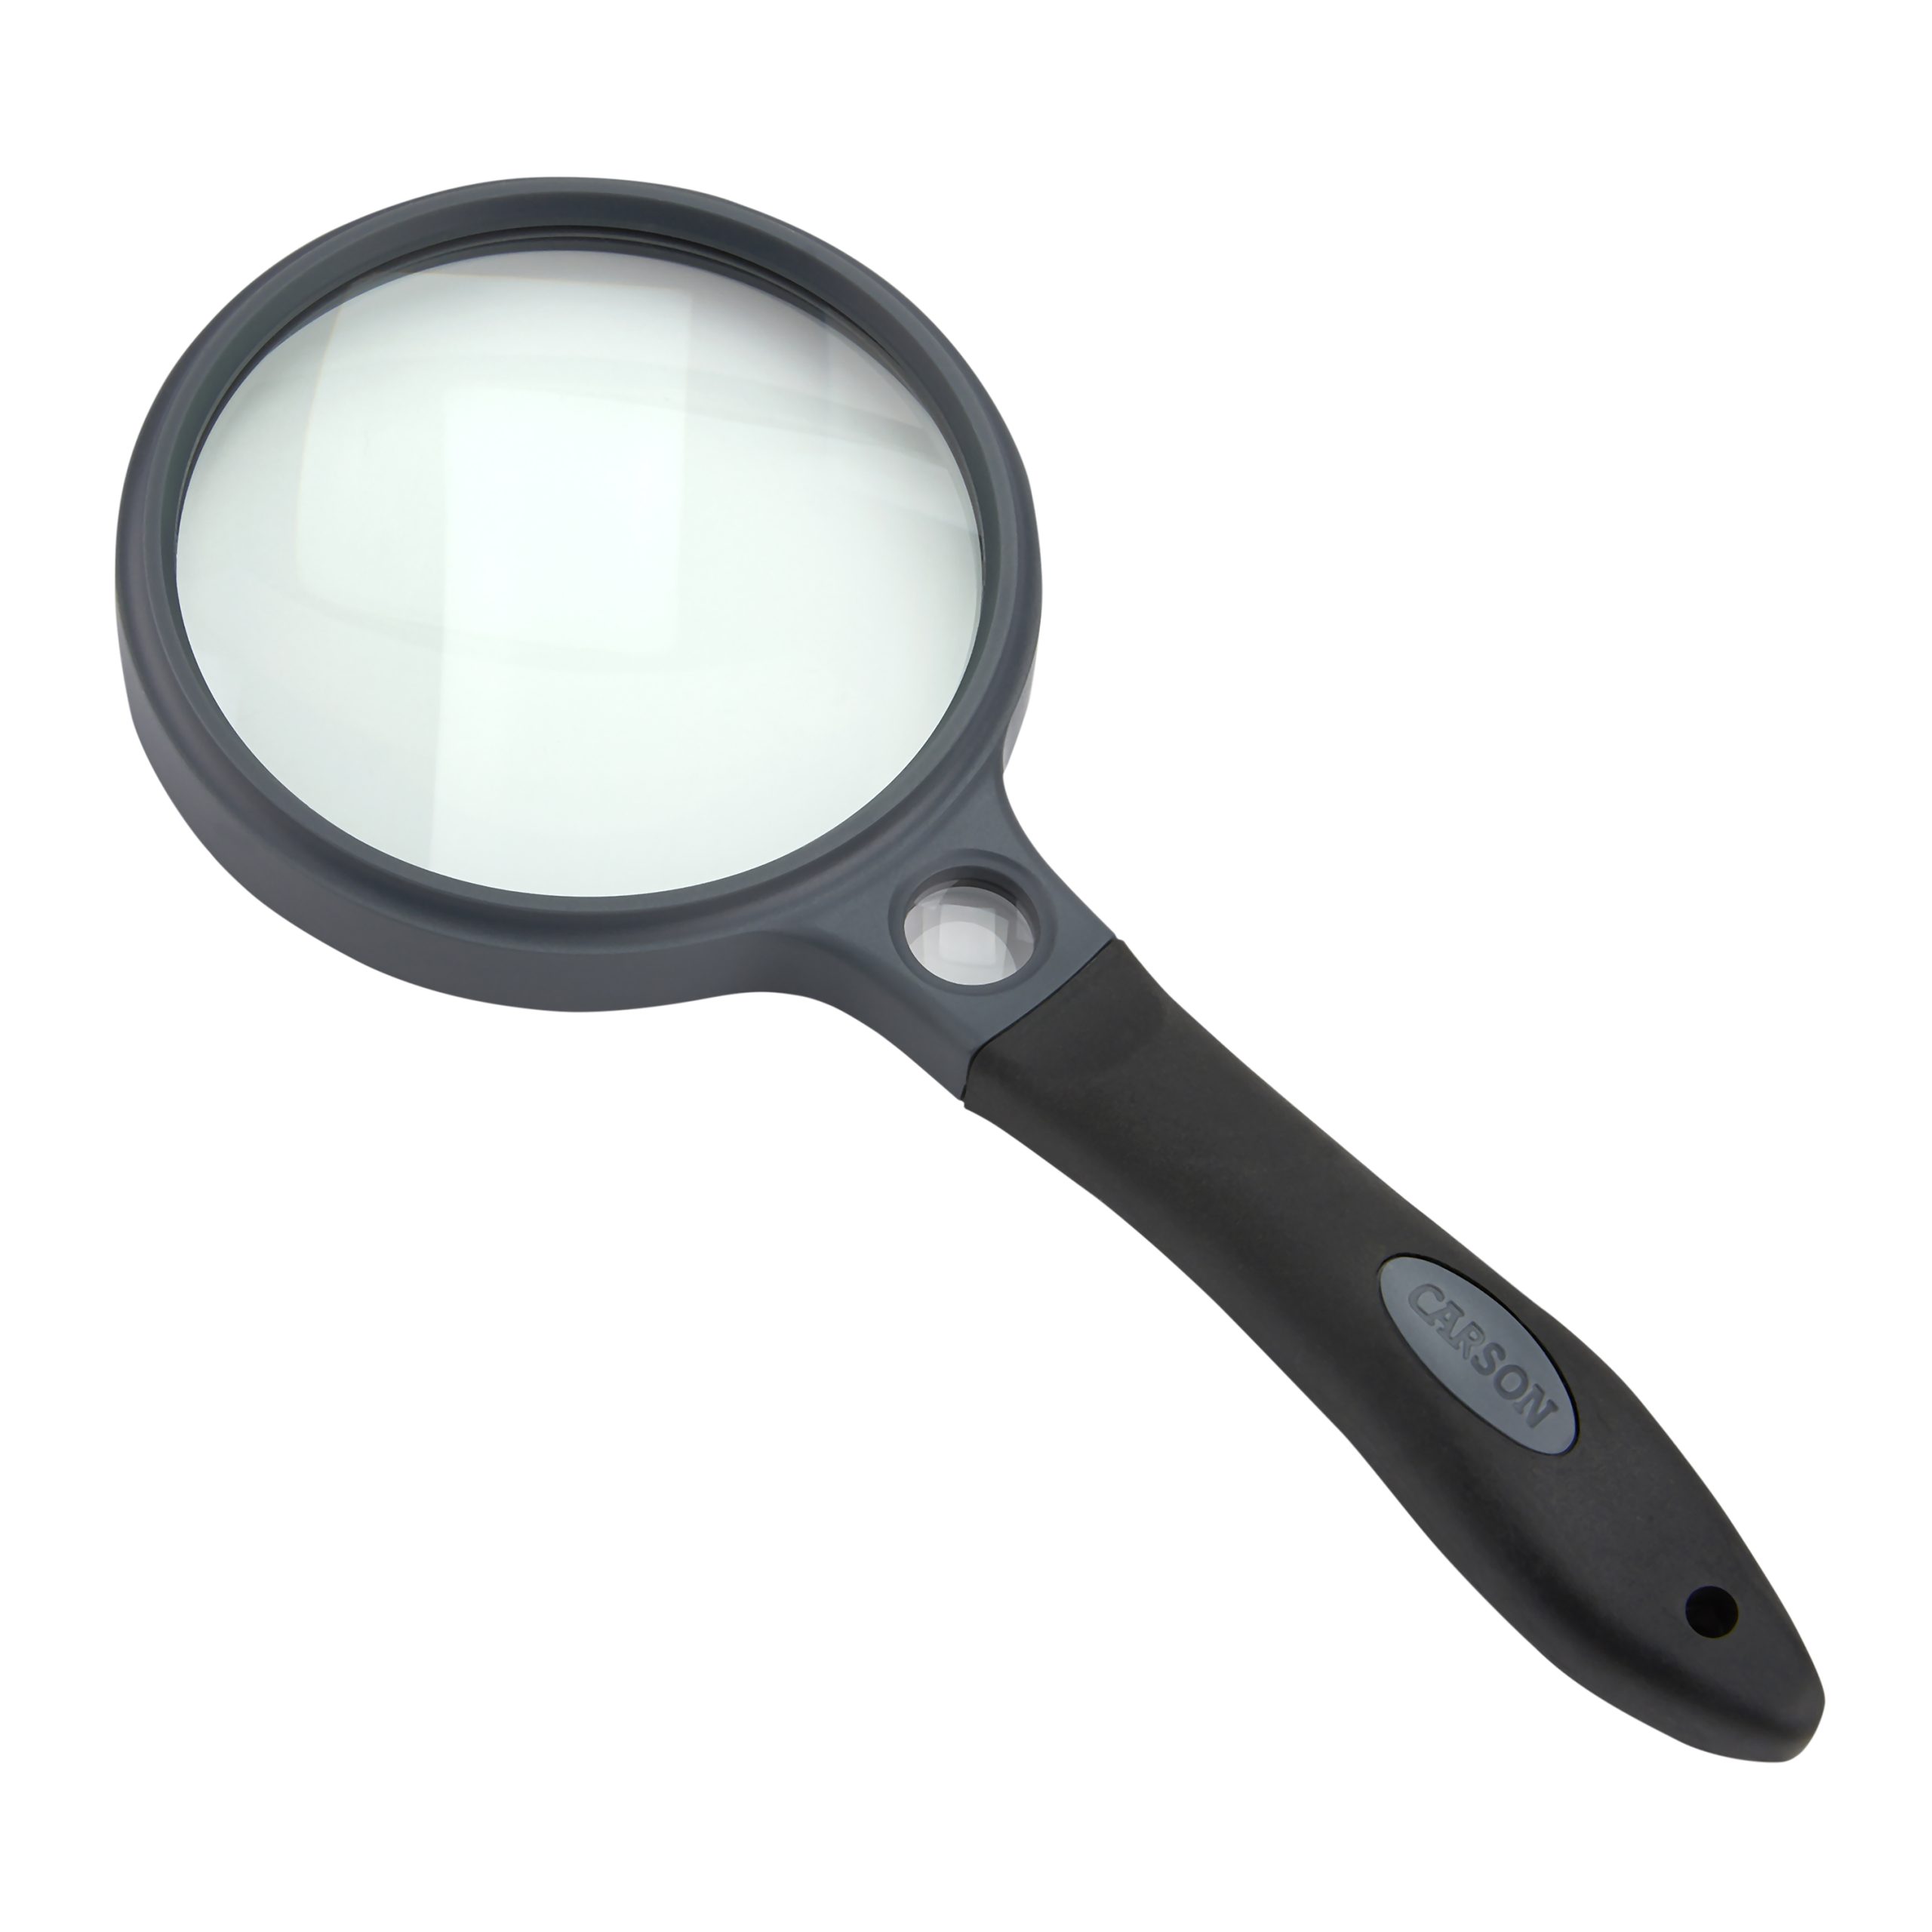 Low Vision Inspection SG-10, SG-12, SG-14, SG-16 Carson SureGrip Series Hand Held or Hands Free 2x Power Magnifying Glasses For Reading Craft and Hobby Magnifiers 